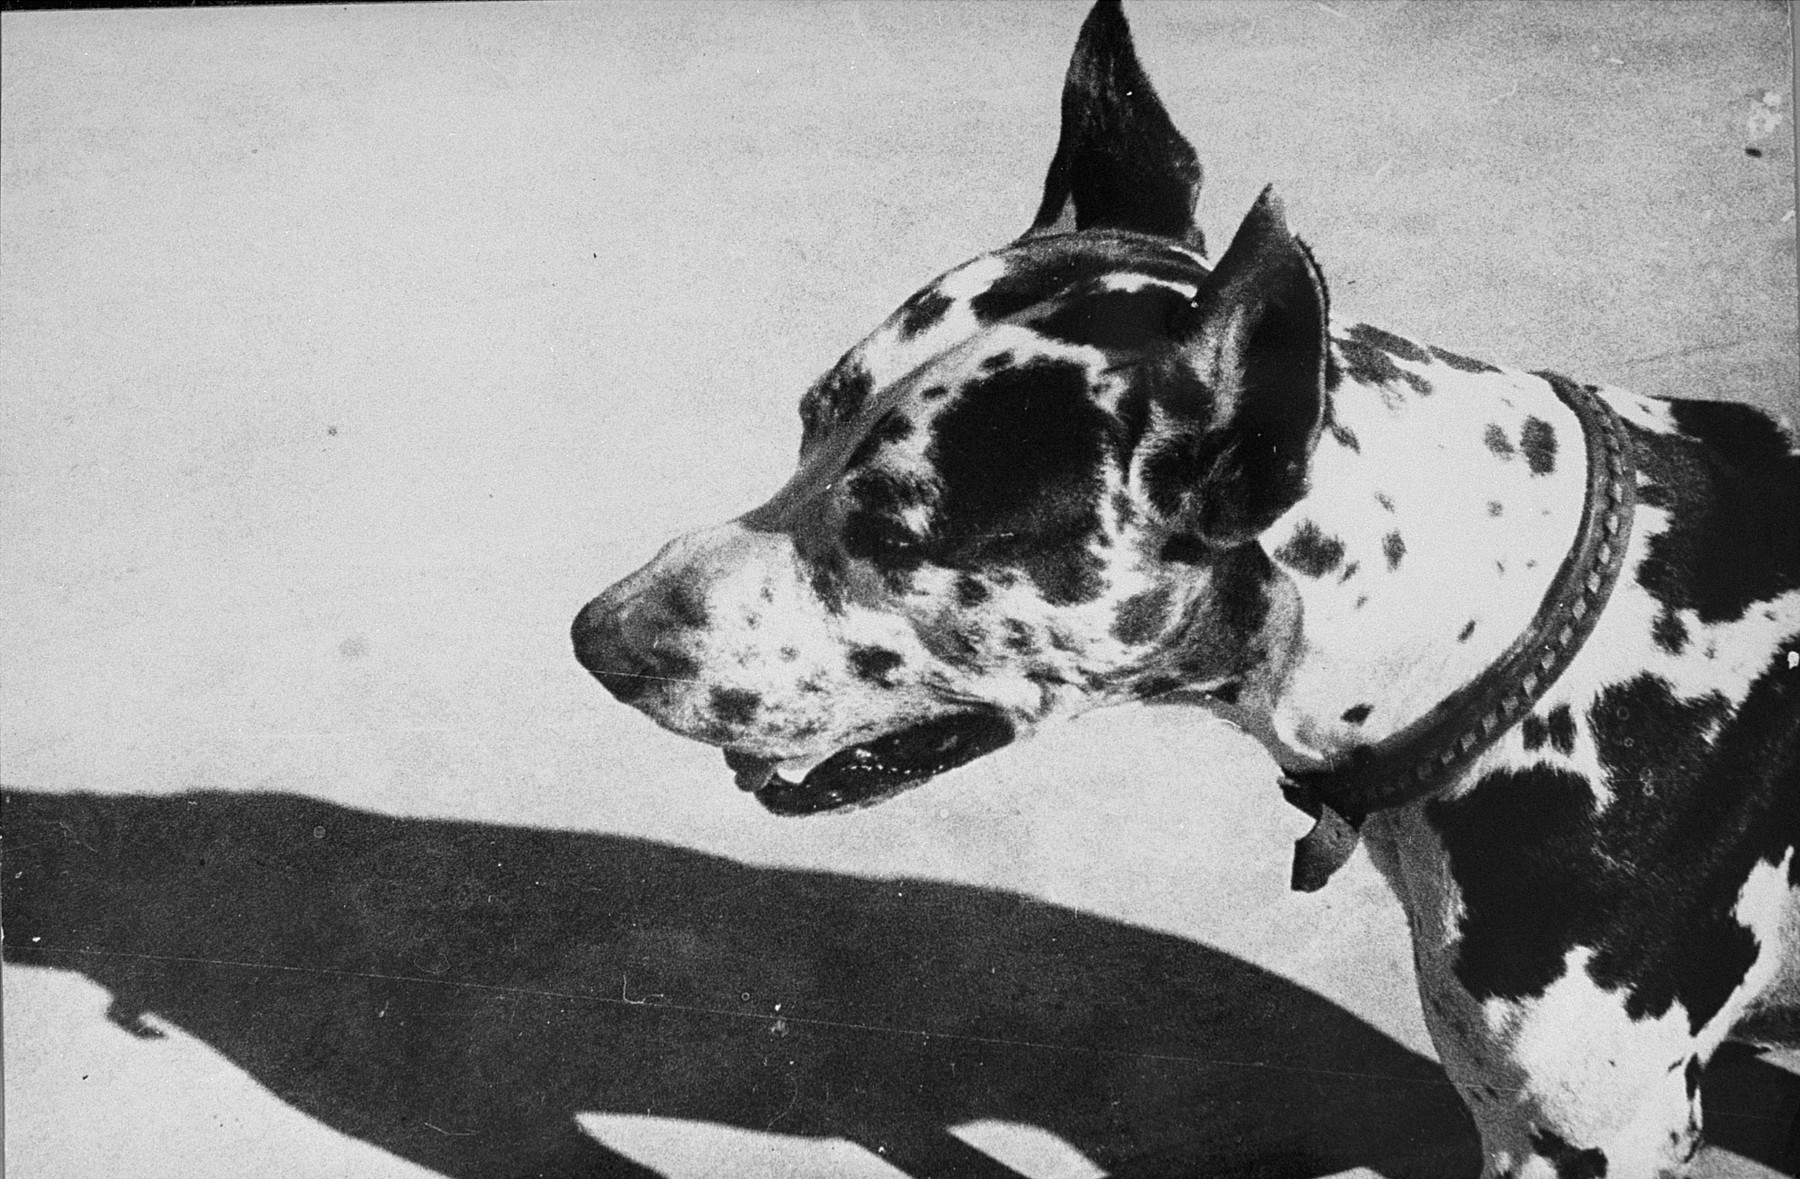 A dog (Ralf?) that belonged to Plaszow commandant Amon Goeth.  

Several prisoners were killed by this dog during Goeth's tenure at Plaszow.